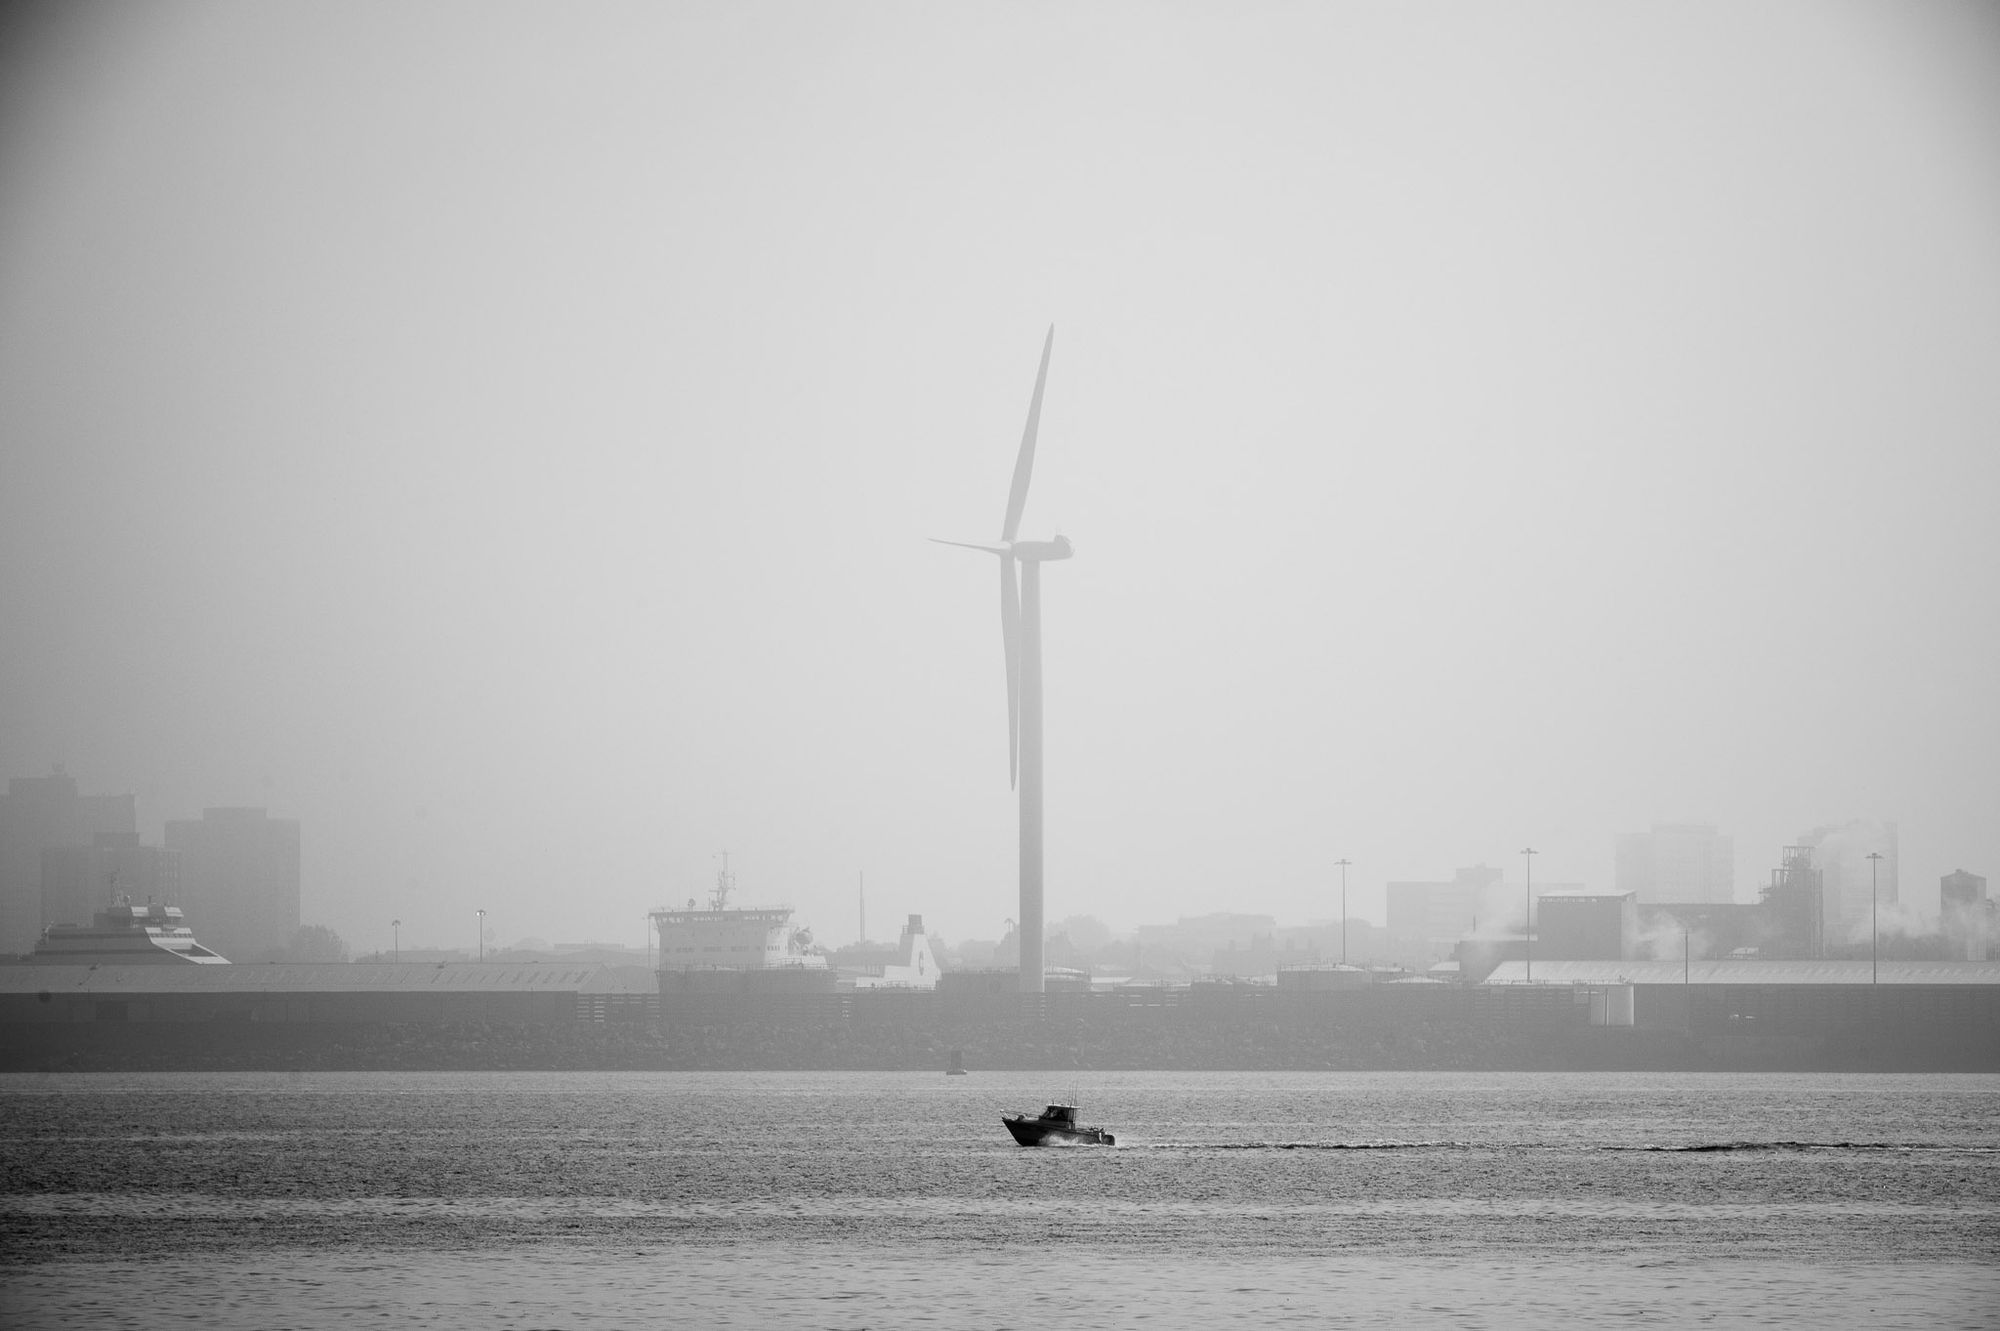 A small boat cruises along the River Mersey. The docks and a large wind turbine are in the background.